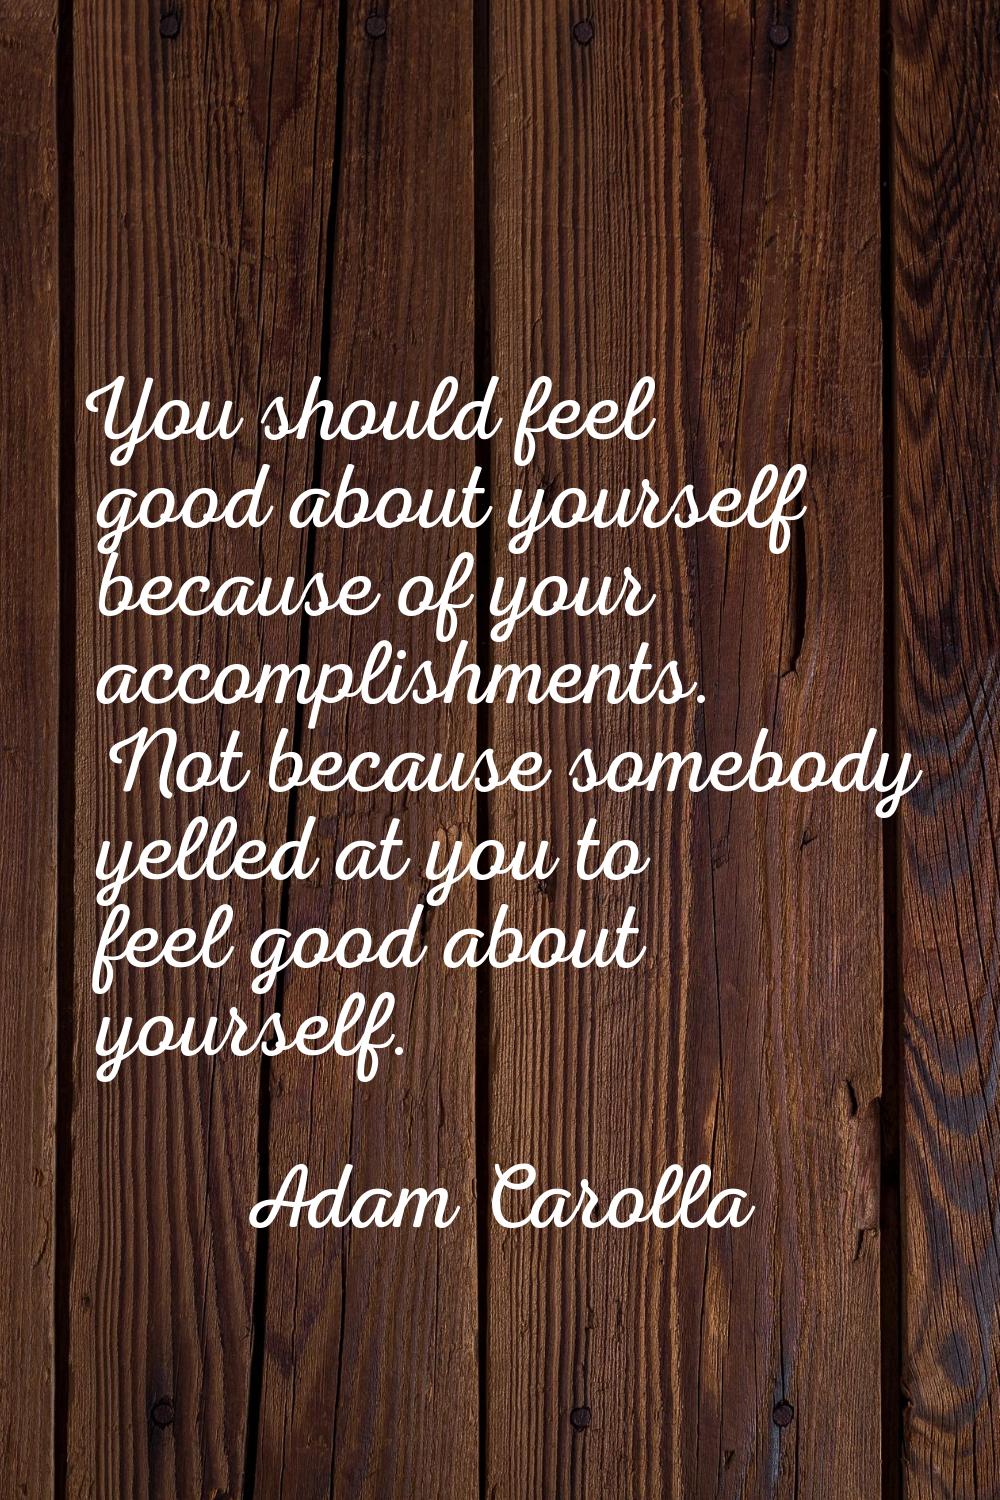 You should feel good about yourself because of your accomplishments. Not because somebody yelled at